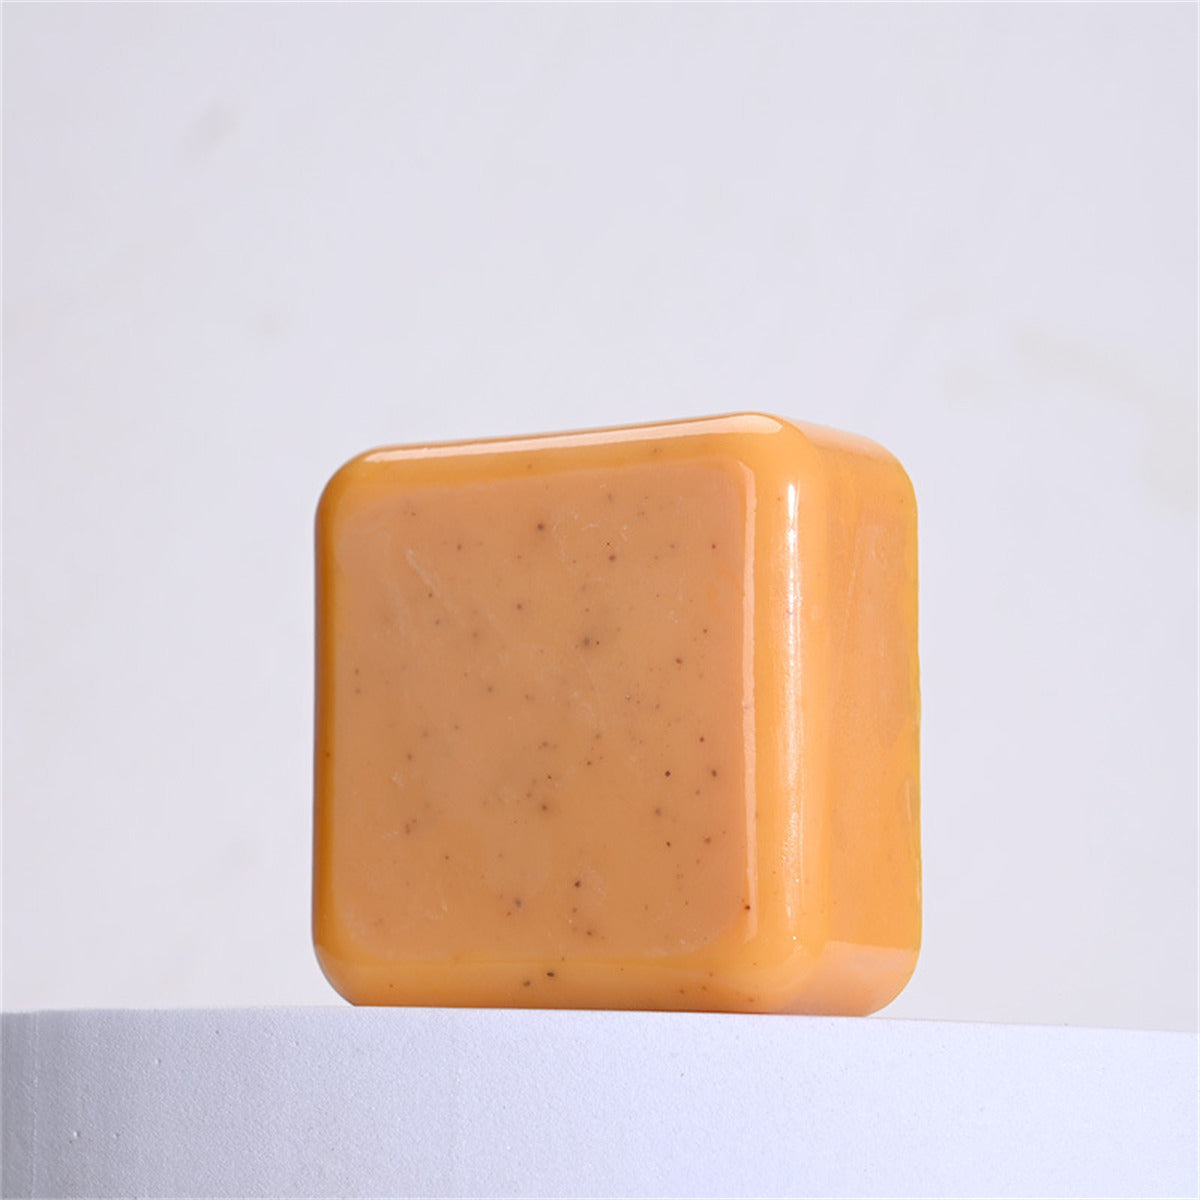 Radiant Skin Duo: Handcrafted Turmeric Soap Bars - Target Dark Spots, Exfoliate, and Nourish Face and Body - Suitable for All Skin Types - Pack of 2